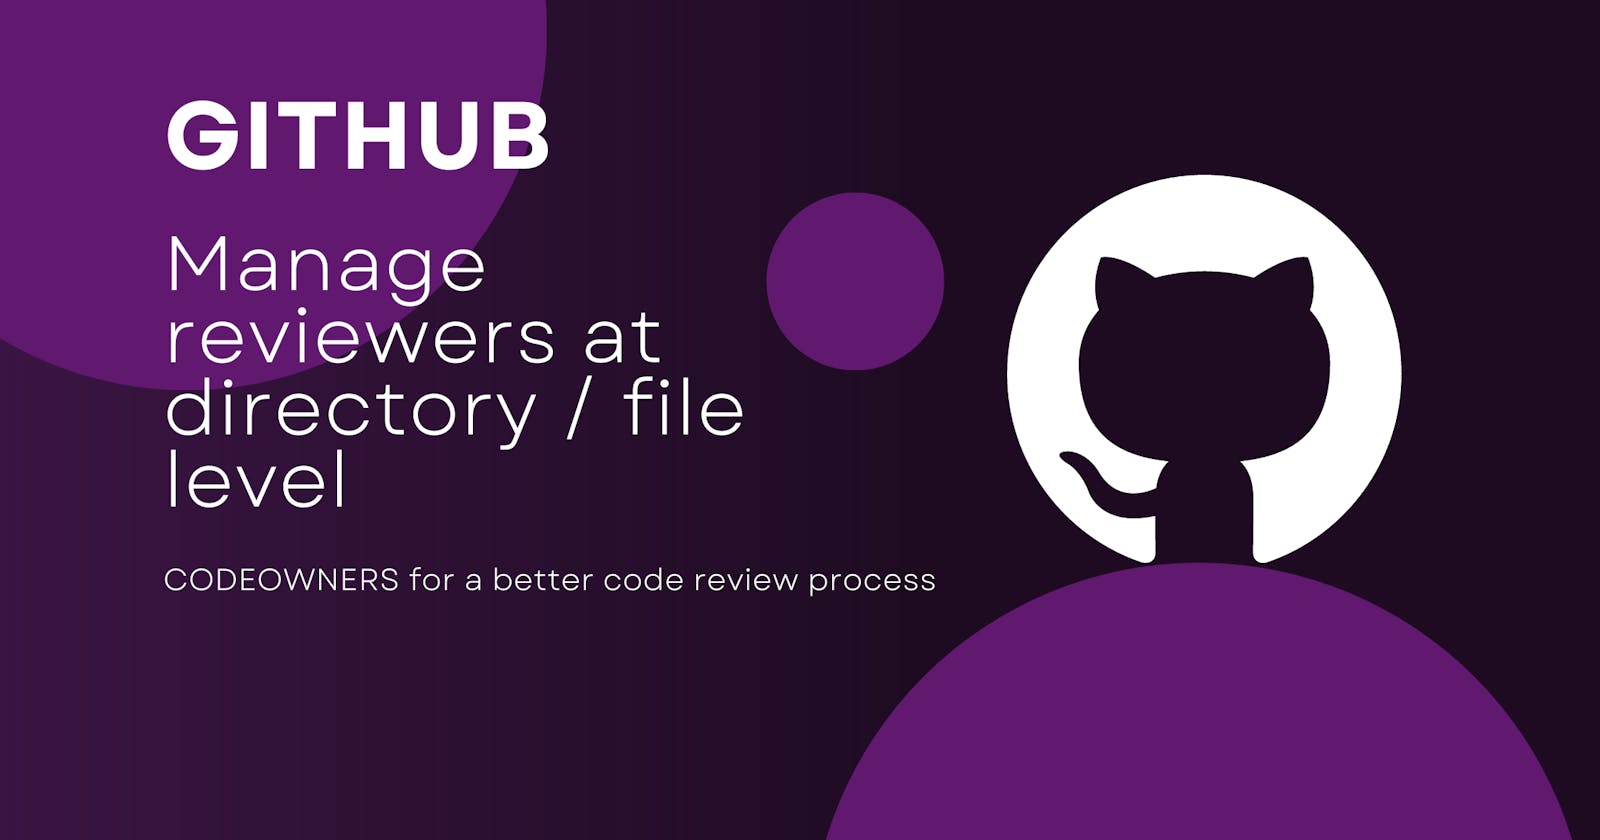 GitHub: Manage reviewers at dir/file level